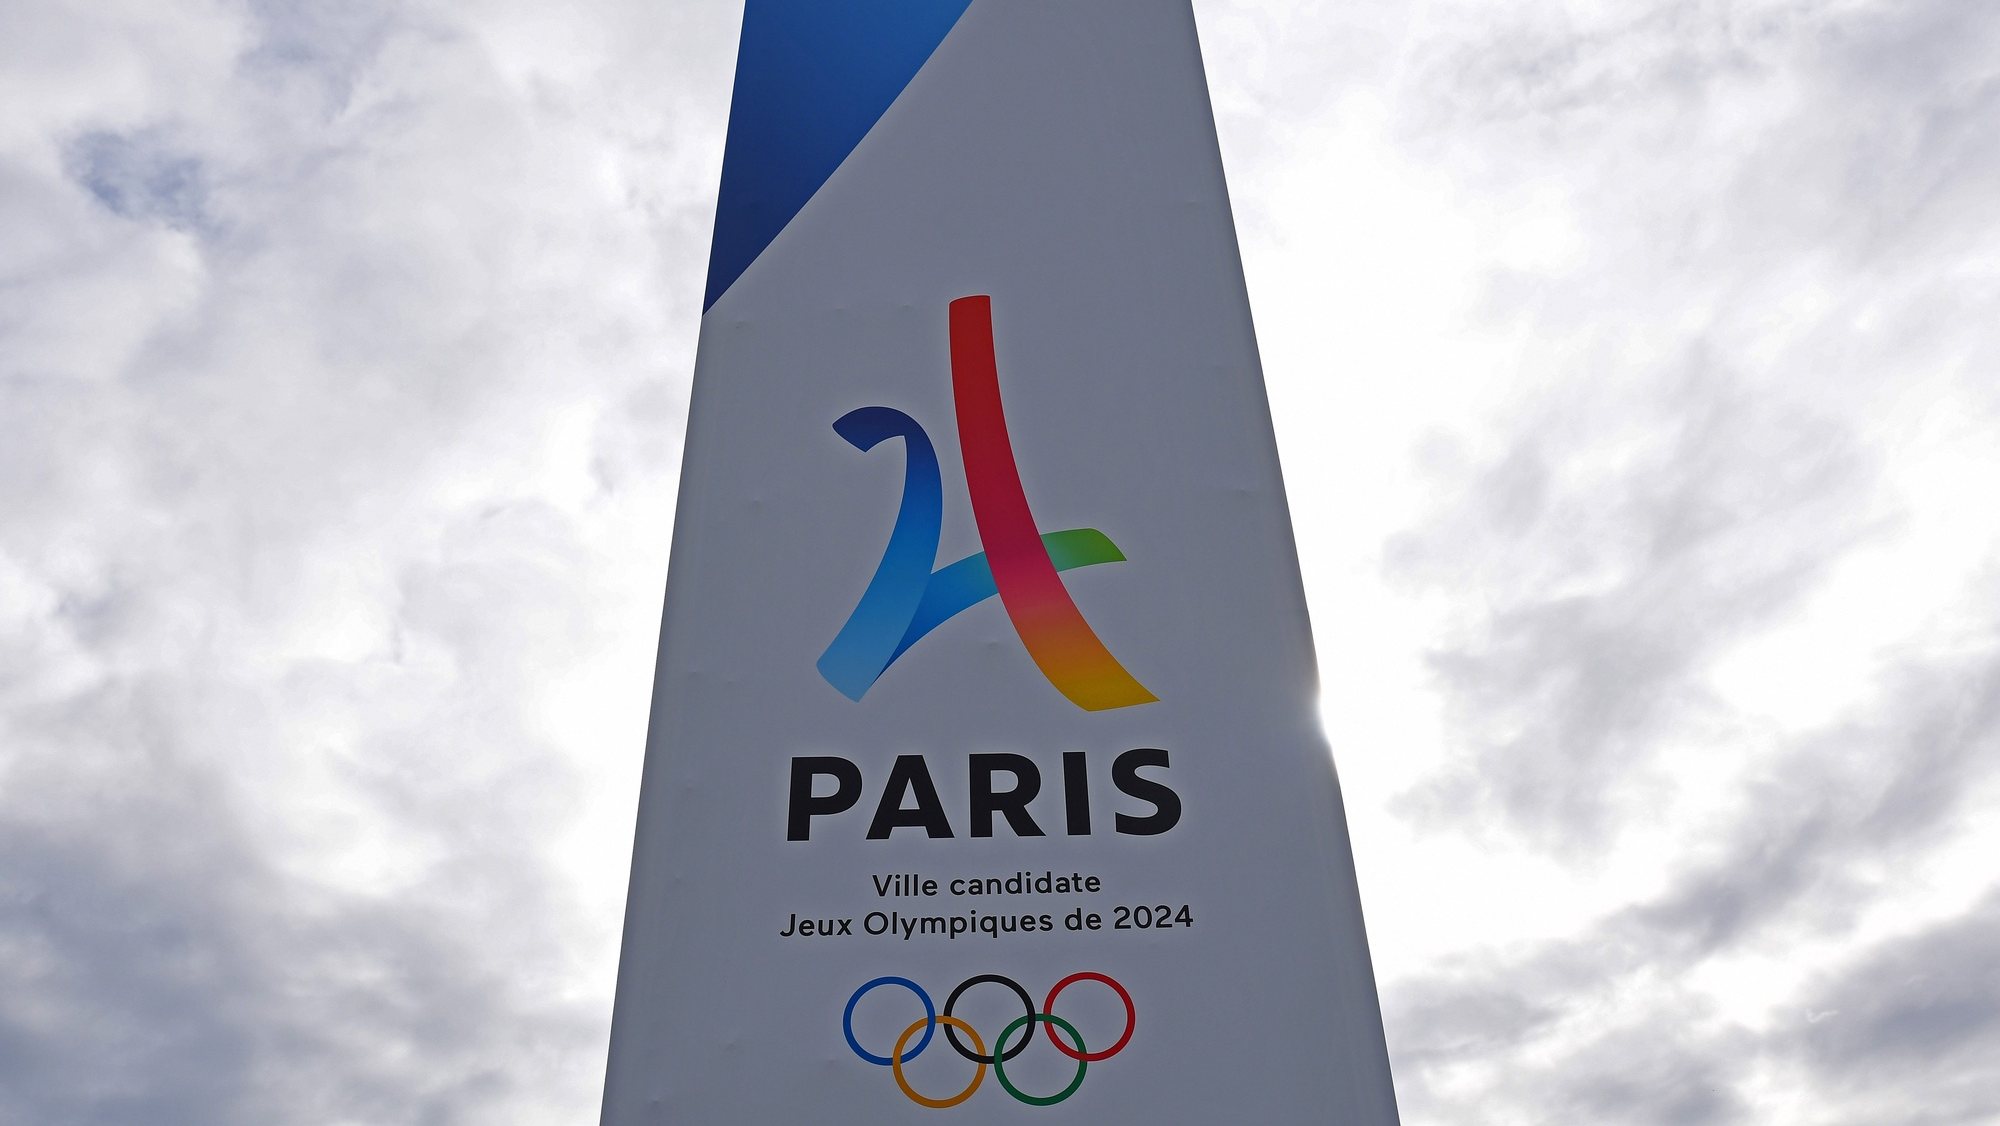 epa06119018 (FILE) - A logo for the Paris Olympic 2024 bid at the site of the planned media village during a press tour of the International Olympic Committee (IOC) Evaluation Commission, in Le Bourget, north of Paris, France, 15 May 2017. Media outlets report, 31 July 2017, that the Los Angeles Olympic bid committee has agreed to wait until 2028 to host the games, leaving Paris poised to host the 2024 Summer Olympics.  EPA/CHRISTOPHE PETIT TESSON